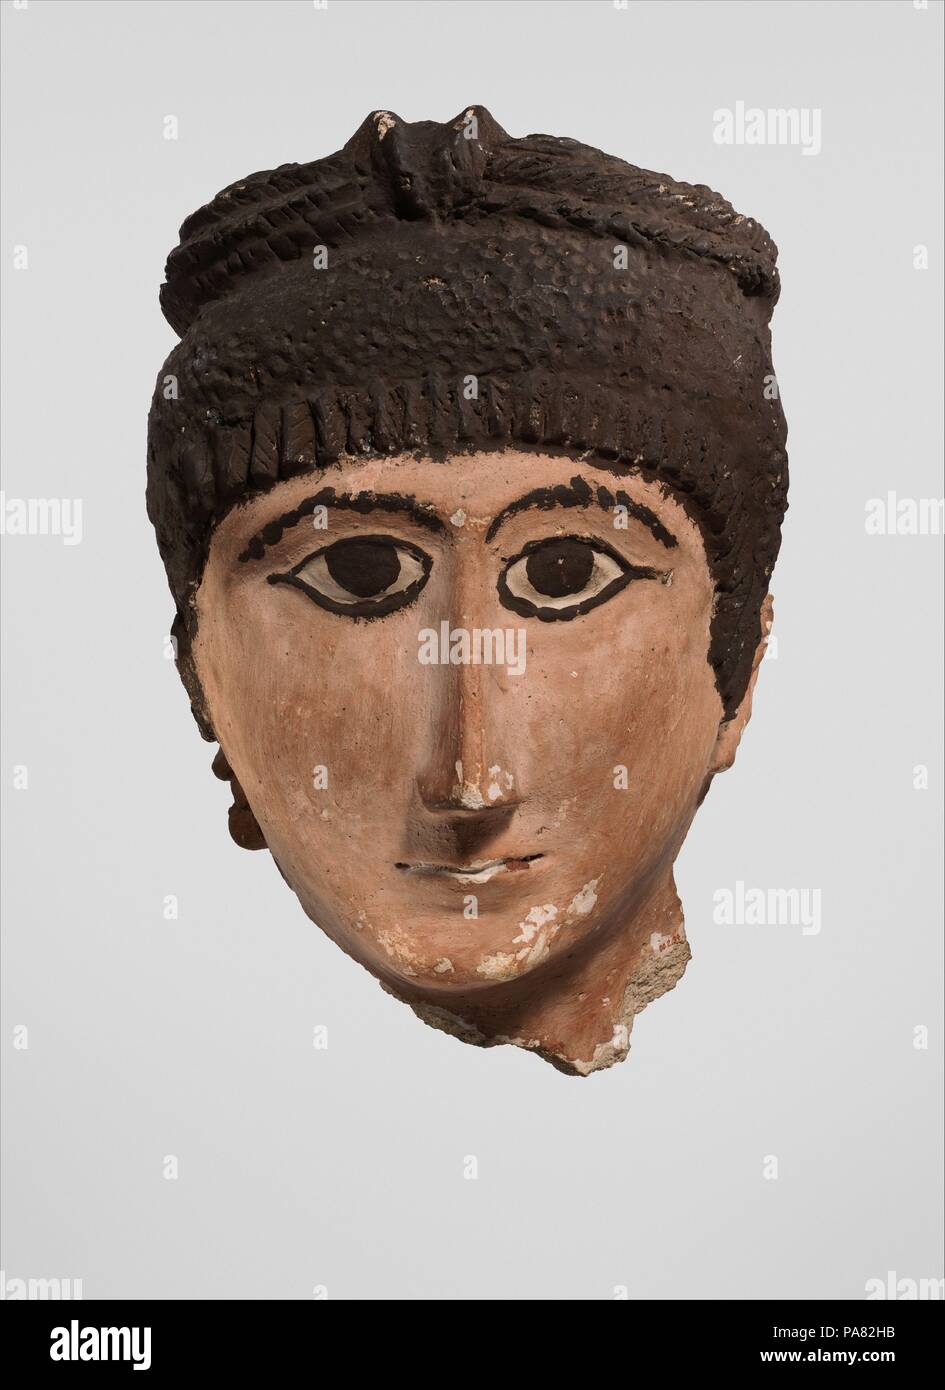 Funerary Mask. Dimensions: h. 23 cm (9 1/16 in); w. 12.2 cm (4 13/16 in). Date: A.D. 1st-4th century. Museum: Metropolitan Museum of Art, New York, USA. Stock Photo